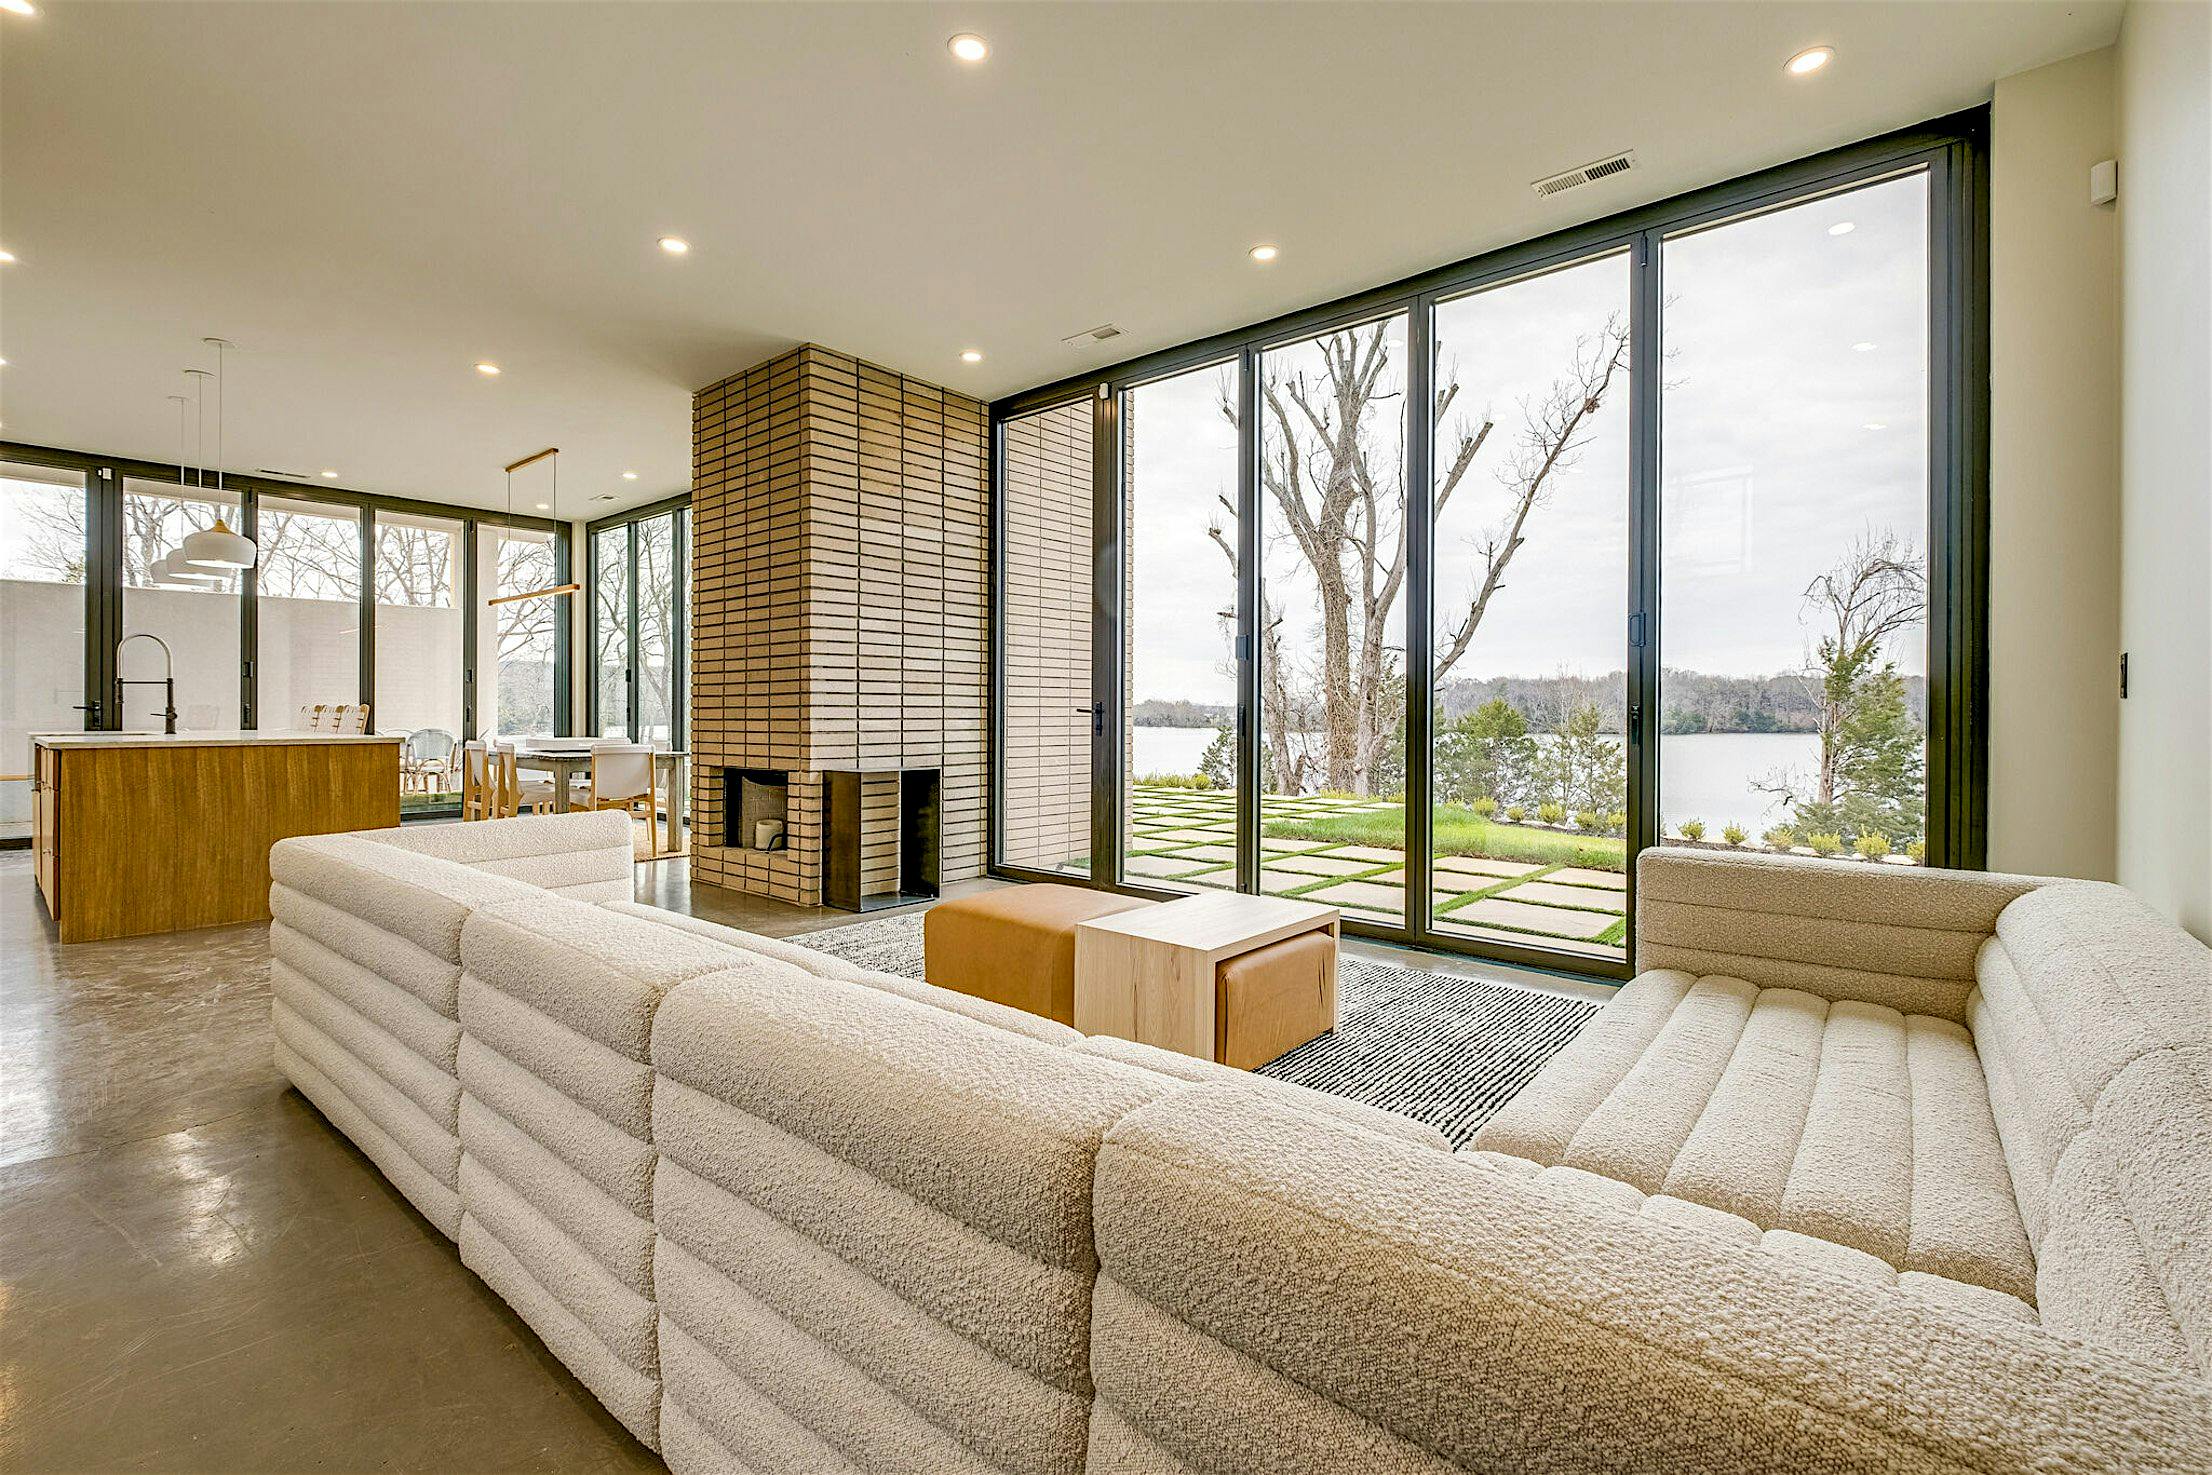 NanaWall glass wall systems in lakefront home